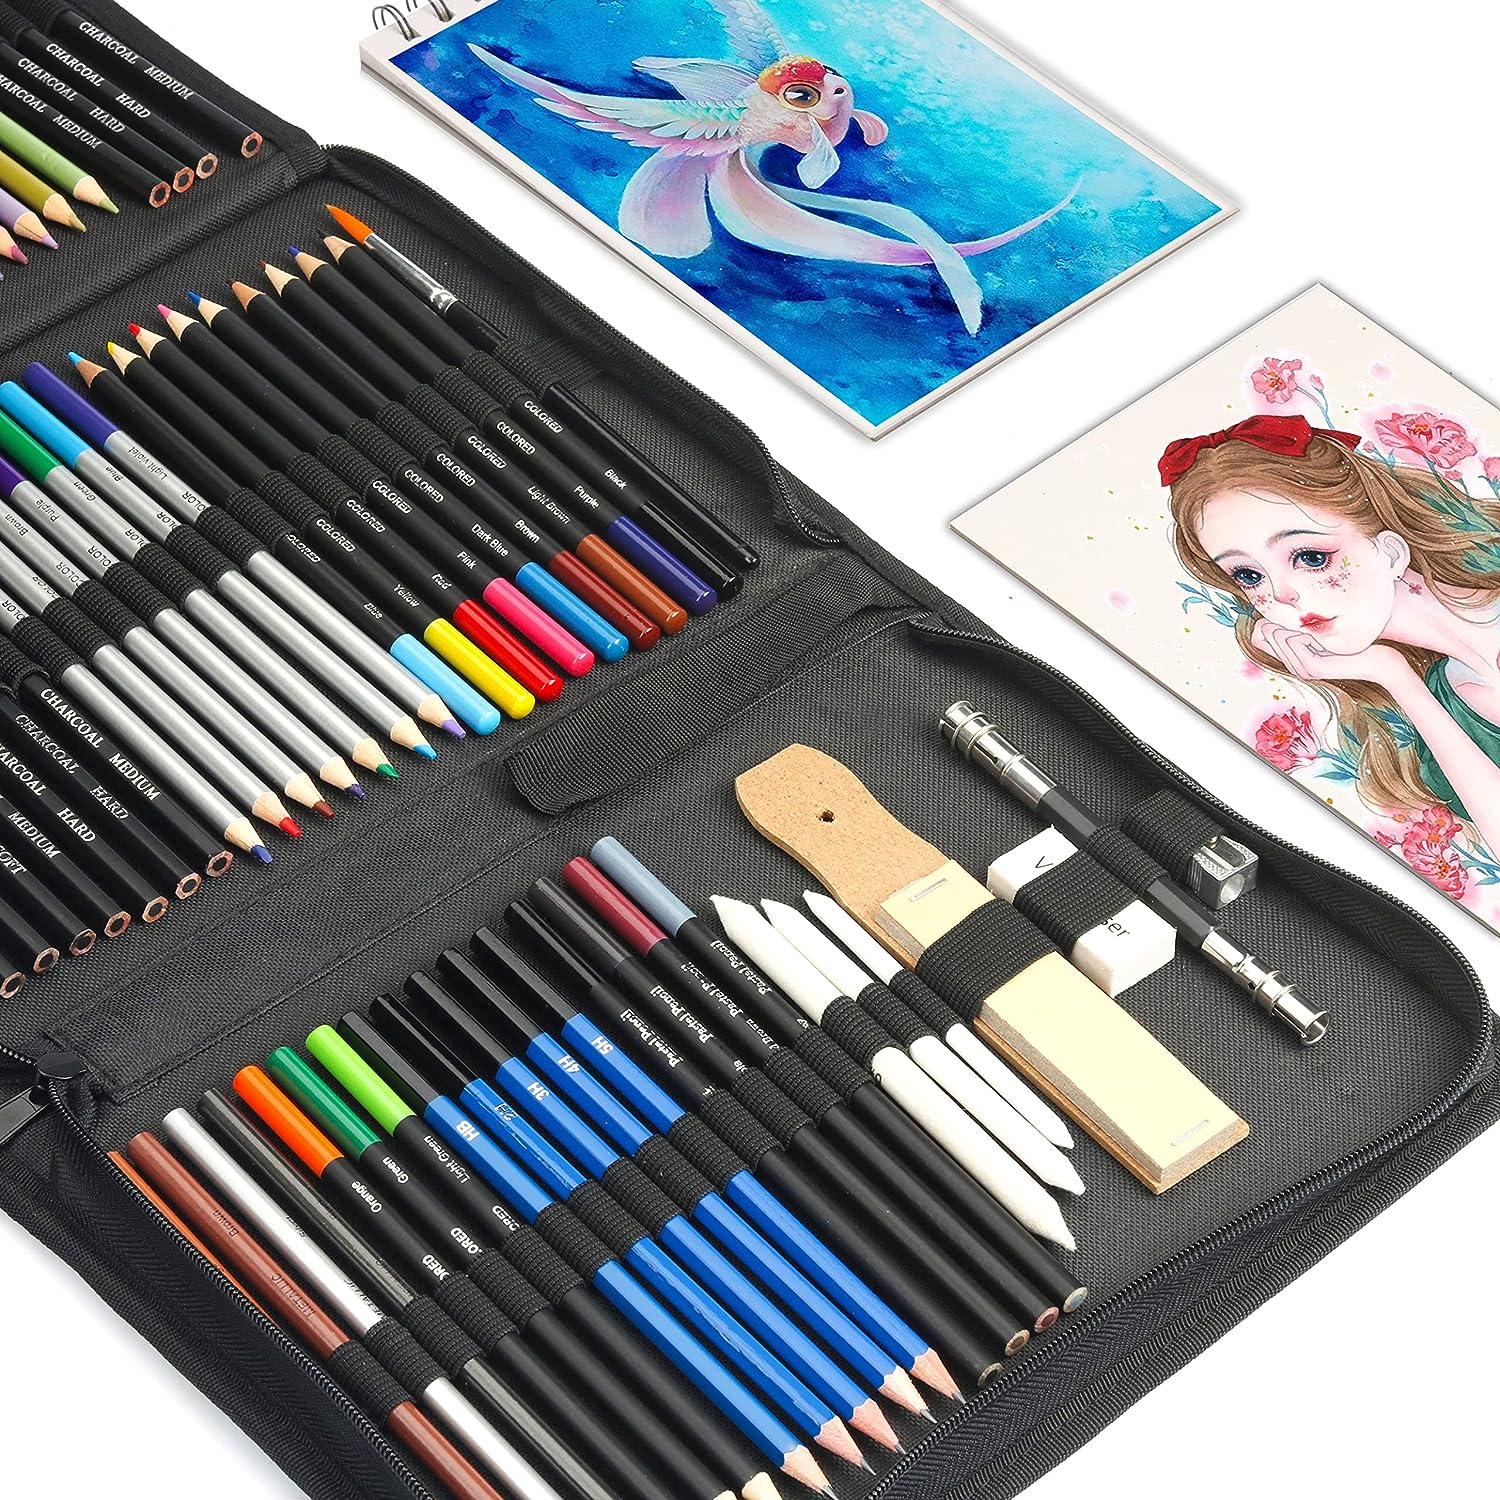 KALOUR 52-Pack Sketch Drawing Pencils Kit with Two Sketchbook,Tin Box,Include Graphite,Charcoal and Artists Tools,Pro Art Drawing Supplies for